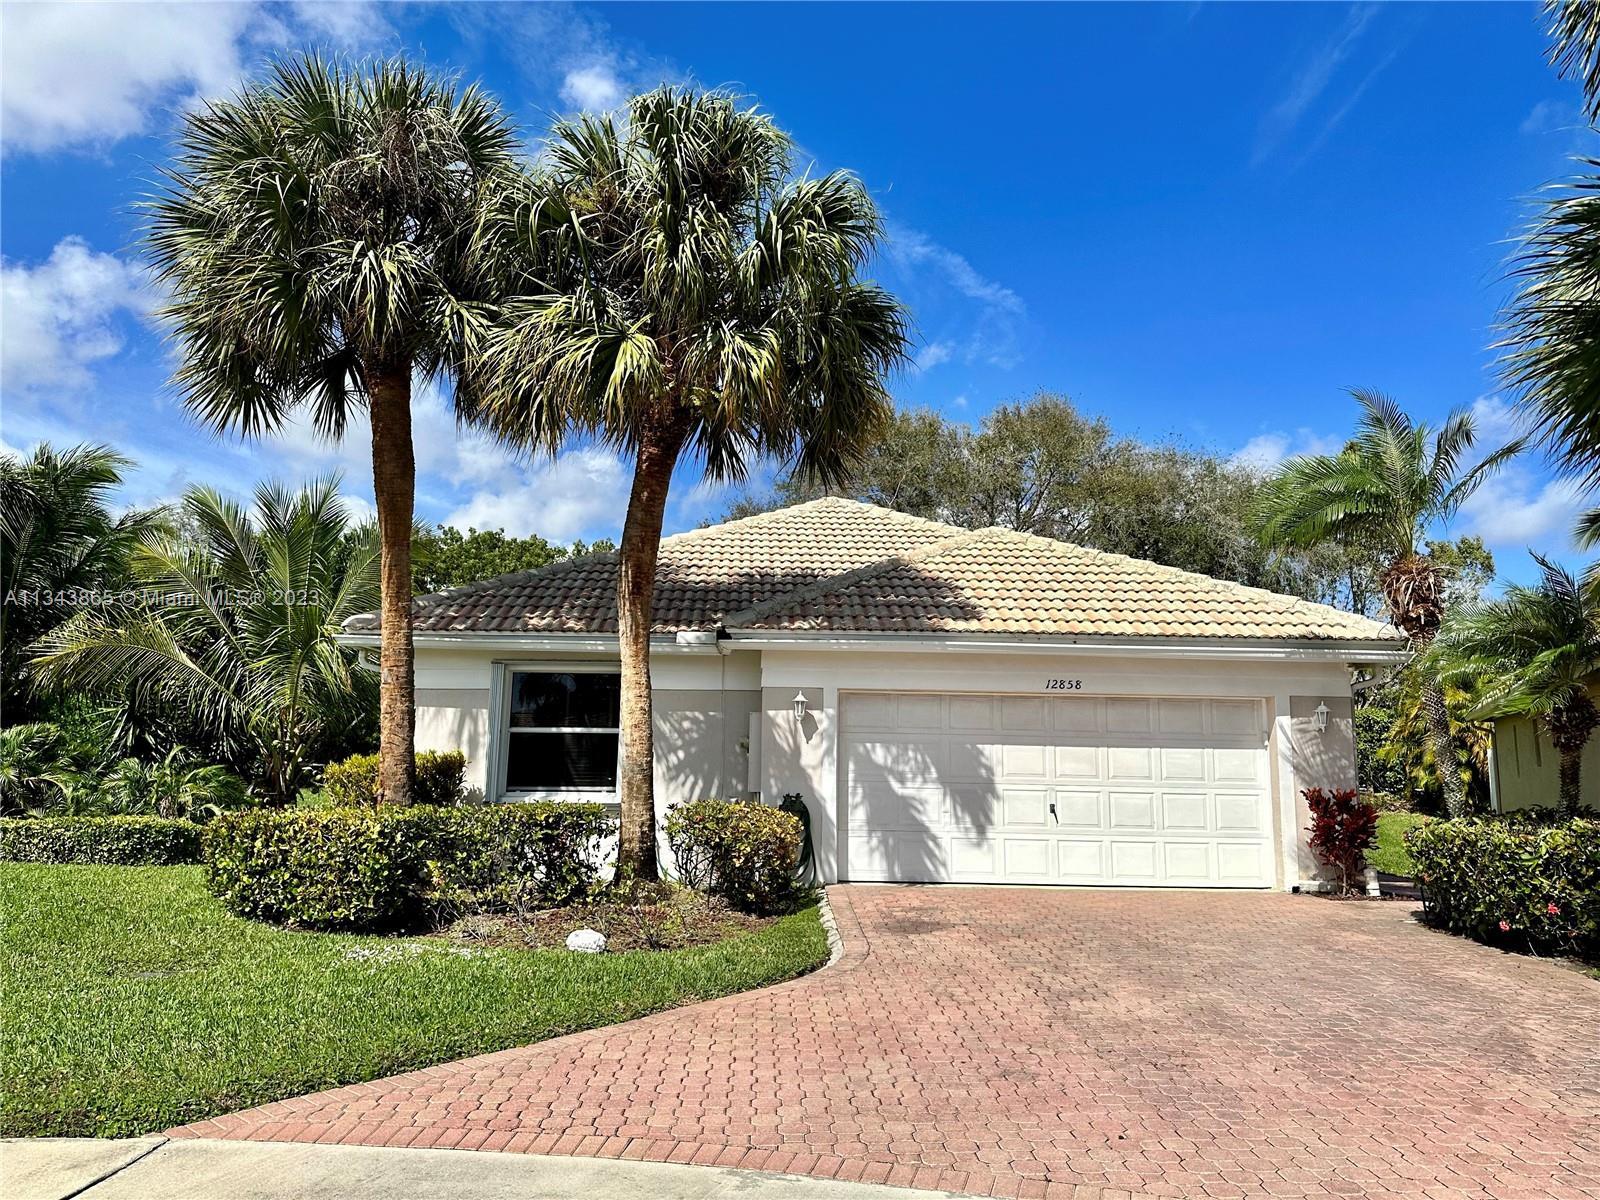 Live in the beautiful gated community of Hampton Lakes.This 3/2 house includes a 2 car garage,galley